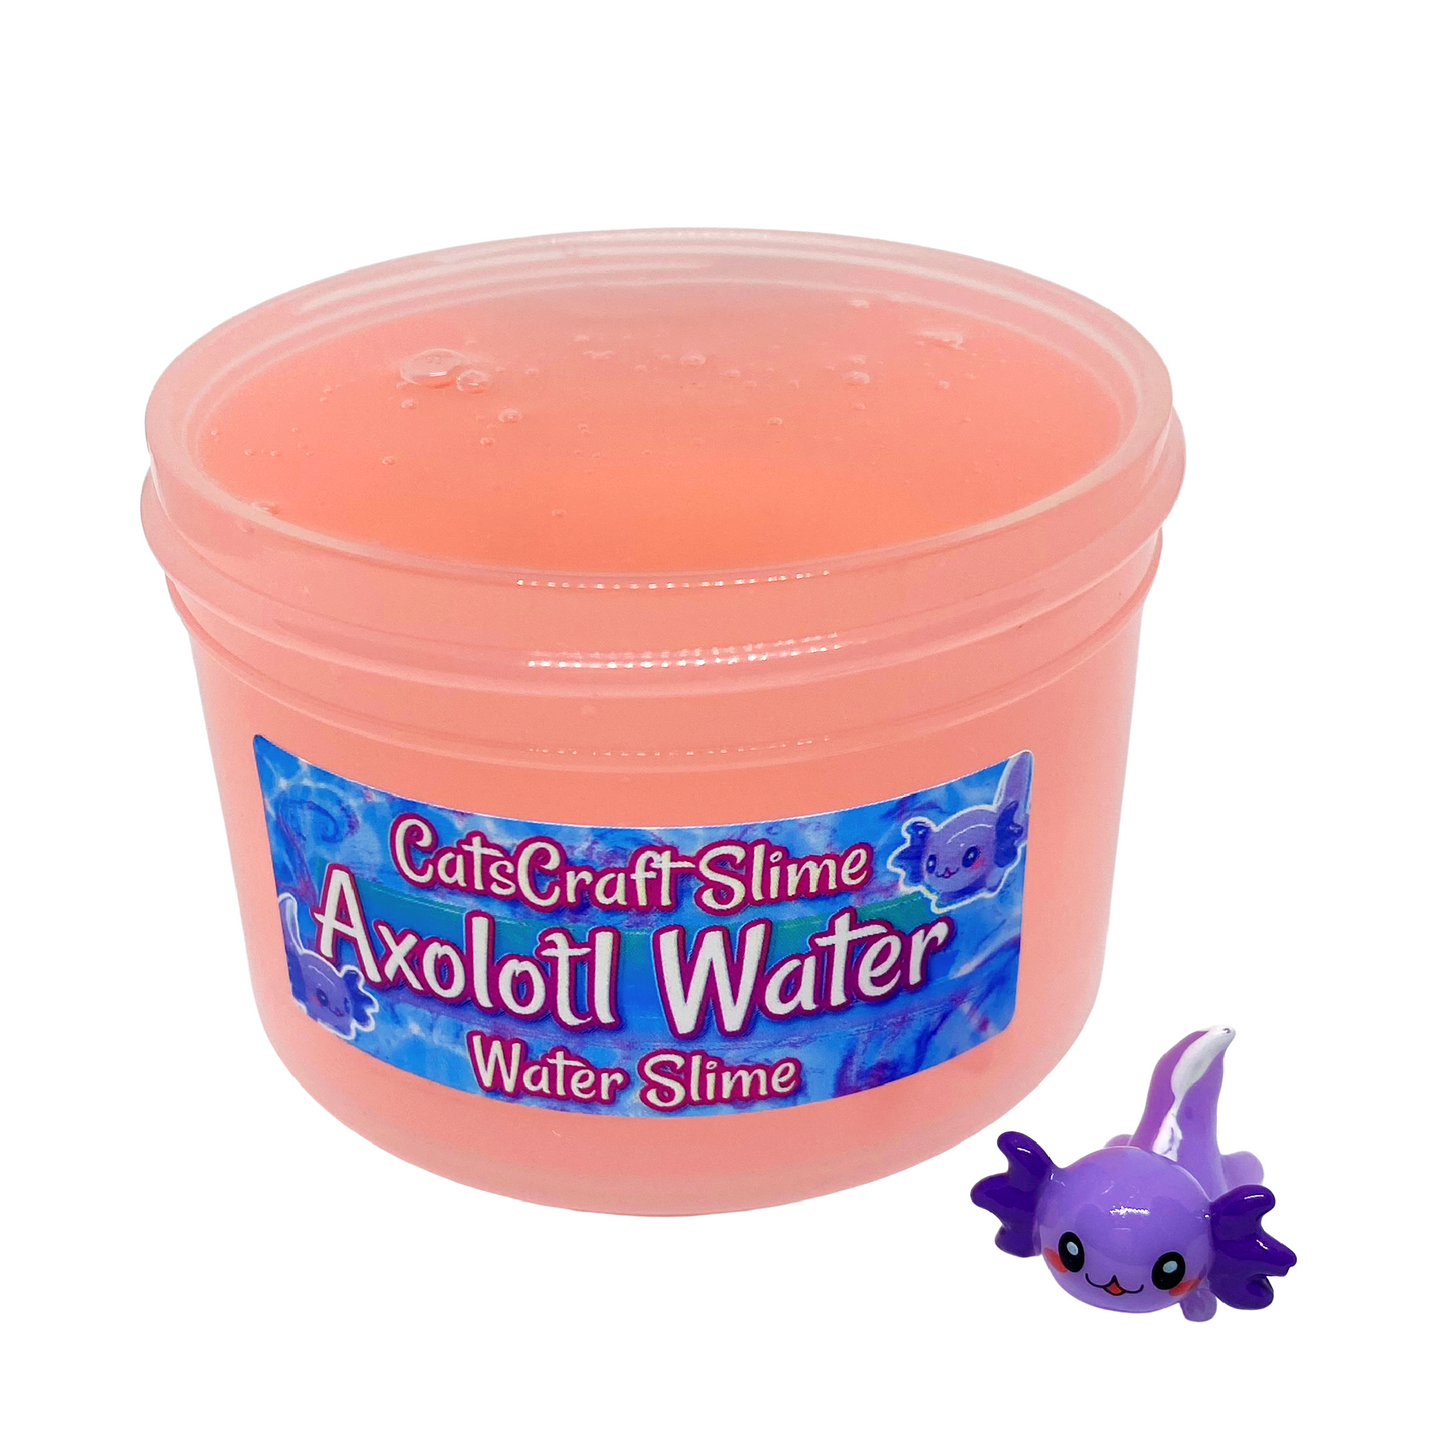 Water Jiggly Slime "Axolotl Water" Scented Clear Slime ASMR 6 oz